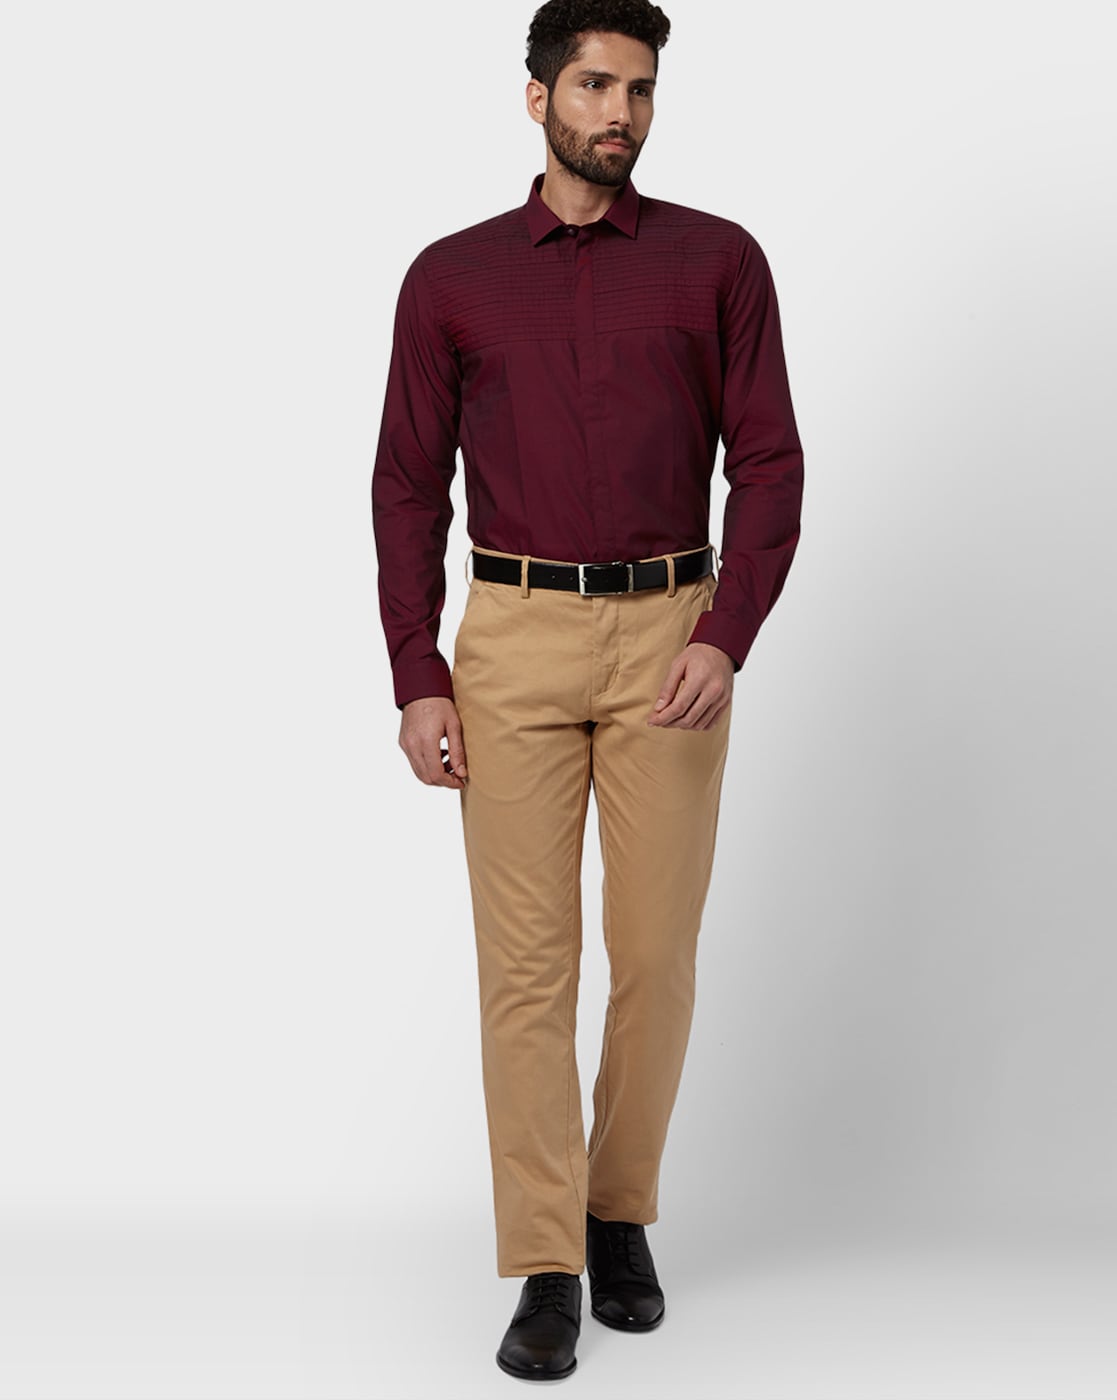 Maroon pant men outfit  Mens outfits Maroon pants Pants outfit men